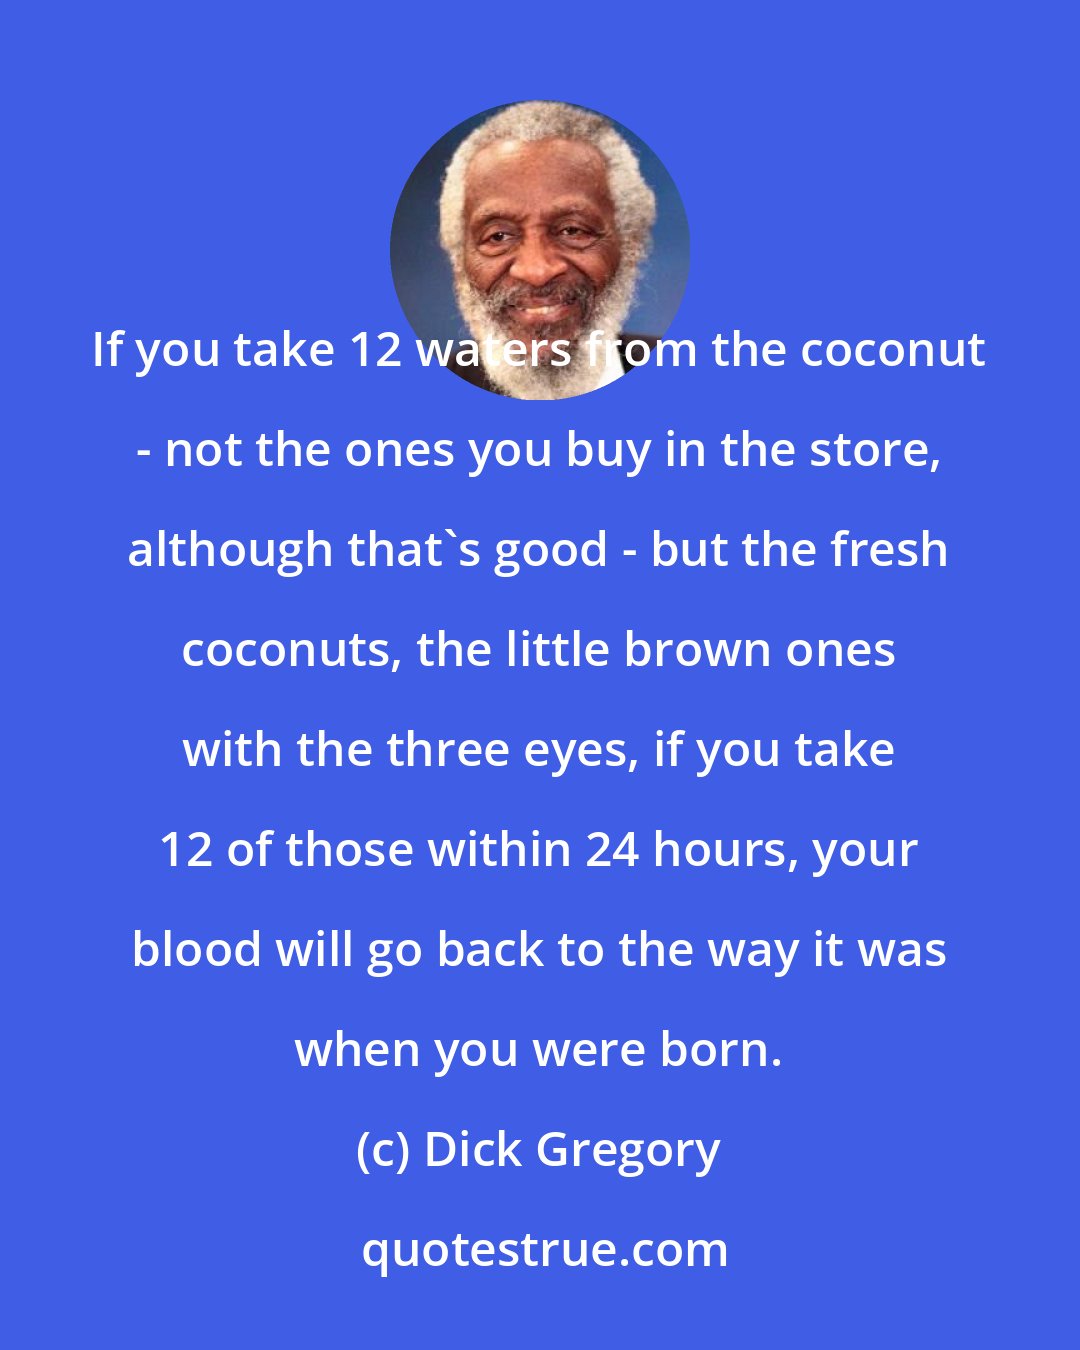 Dick Gregory: If you take 12 waters from the coconut - not the ones you buy in the store, although that's good - but the fresh coconuts, the little brown ones with the three eyes, if you take 12 of those within 24 hours, your blood will go back to the way it was when you were born.